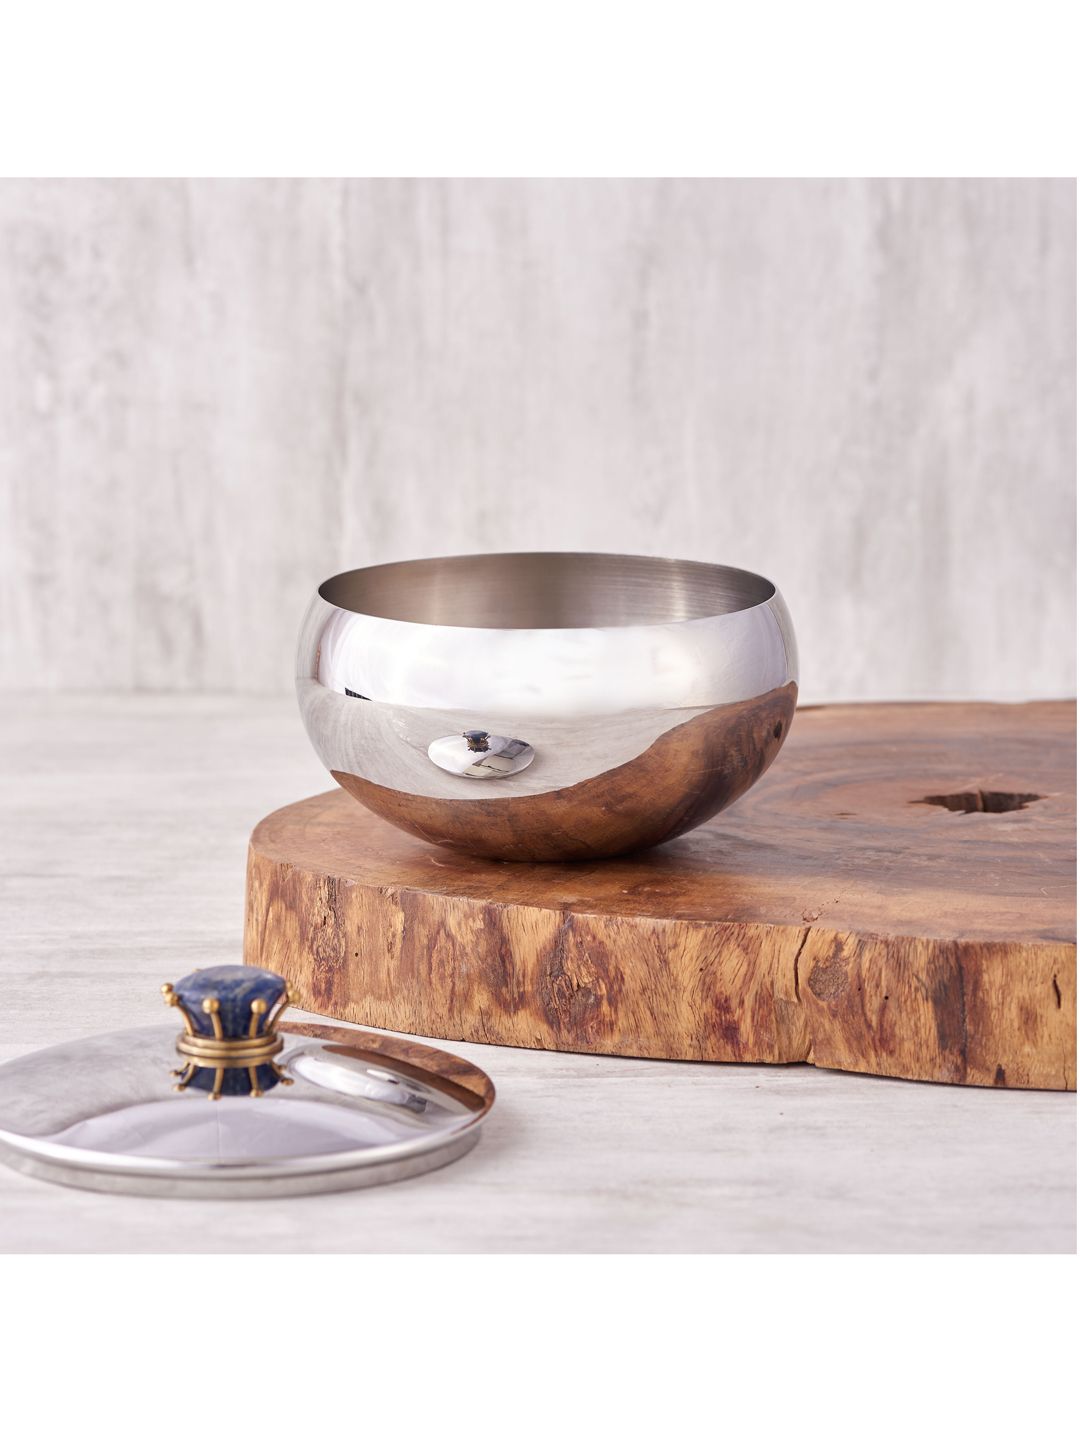 ARTTDINOX Silver-Toned Stainless Steel Royal Lapiz Small Serving Bowl Price in India